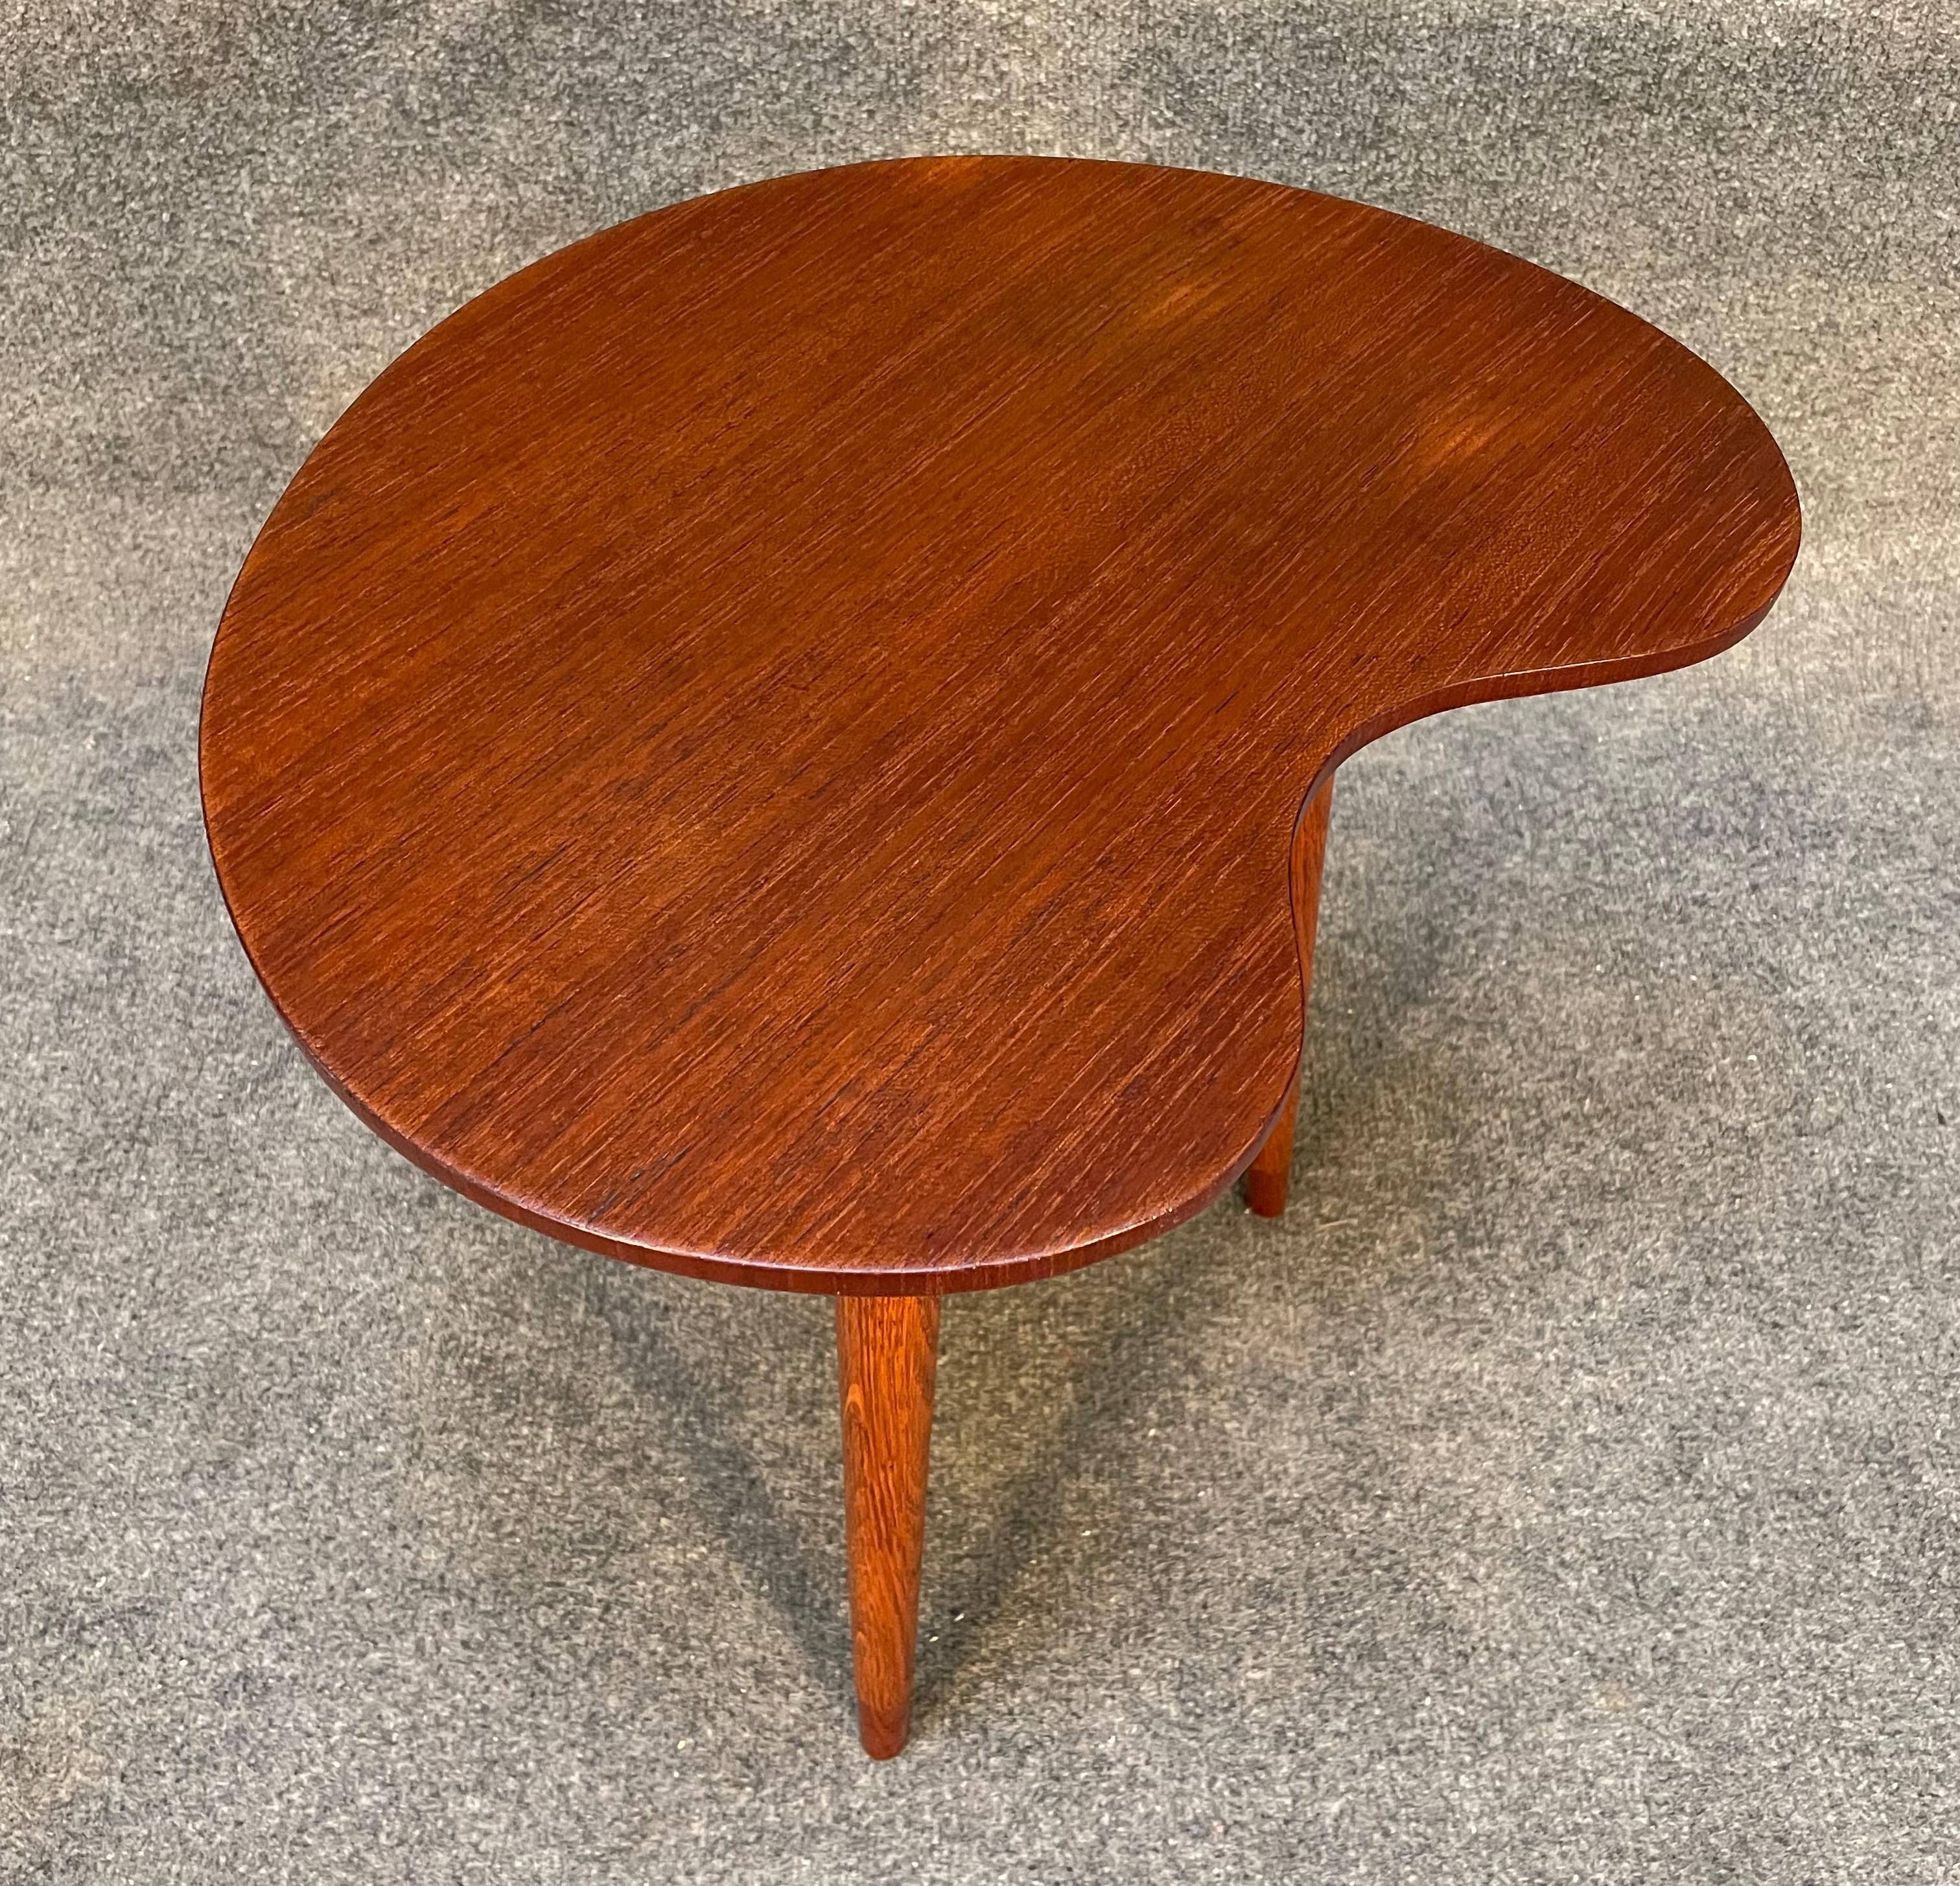 Here is a beautiful 1960's scandinavian modern end table in teak & oak manufactured by Gorm Mobler in Denmark in the 1960's.
This lovely side table, recently imported rom Europe to California before its refinishing, features a vibrant wood grain on